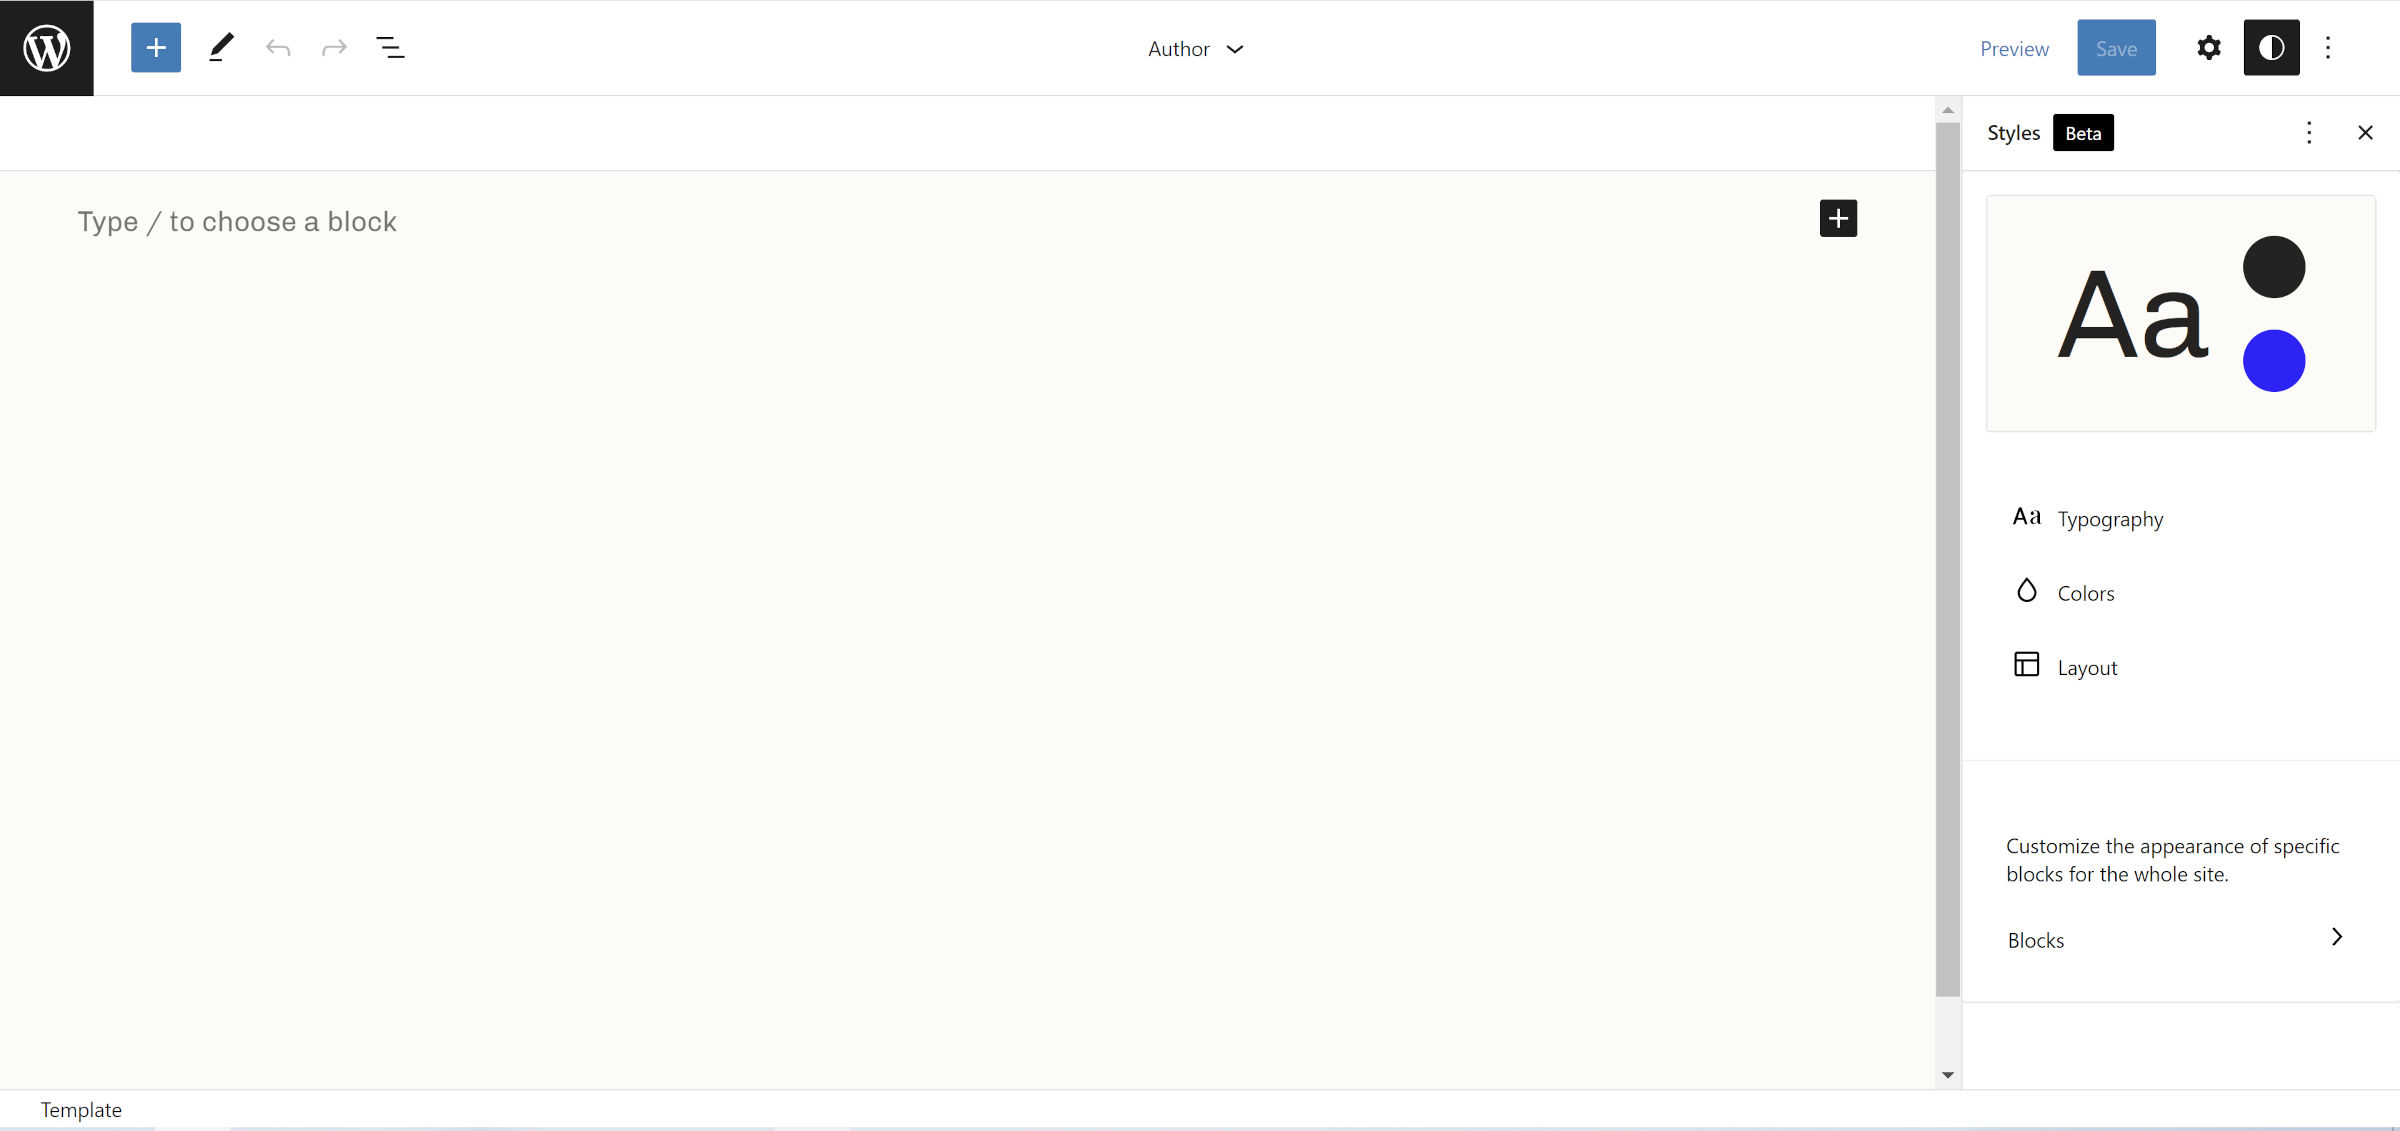 Default WordPress author template is an empty content canvas.